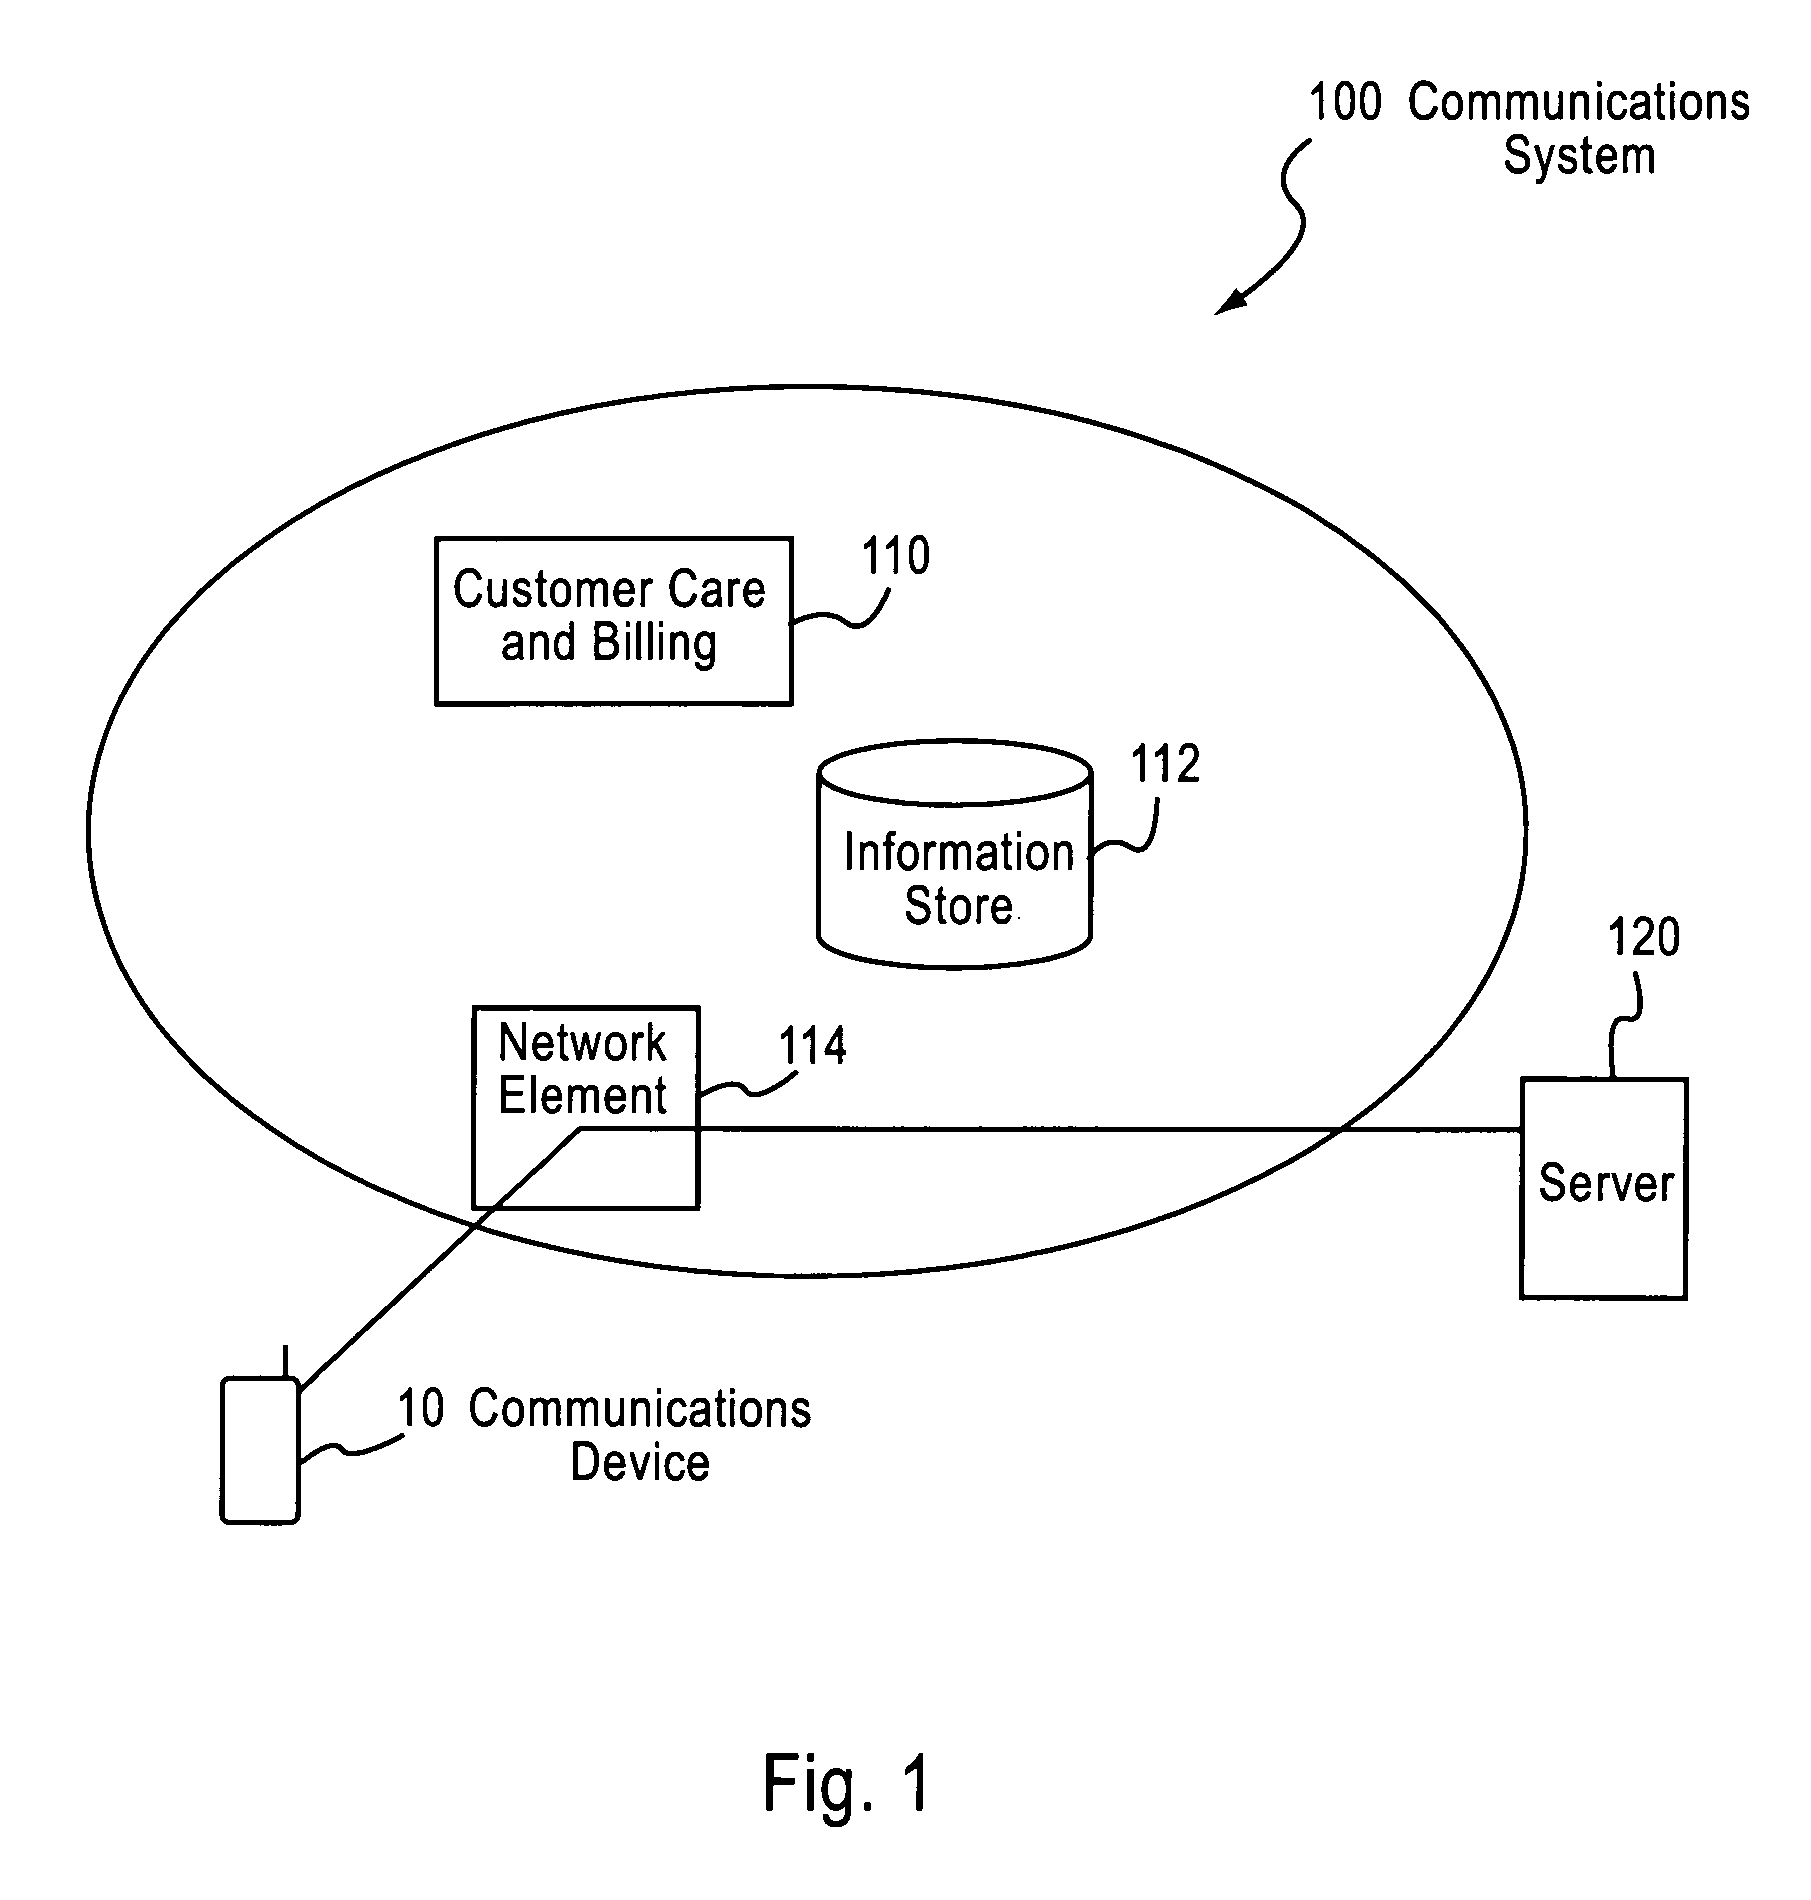 Controlling access to services in a communications system